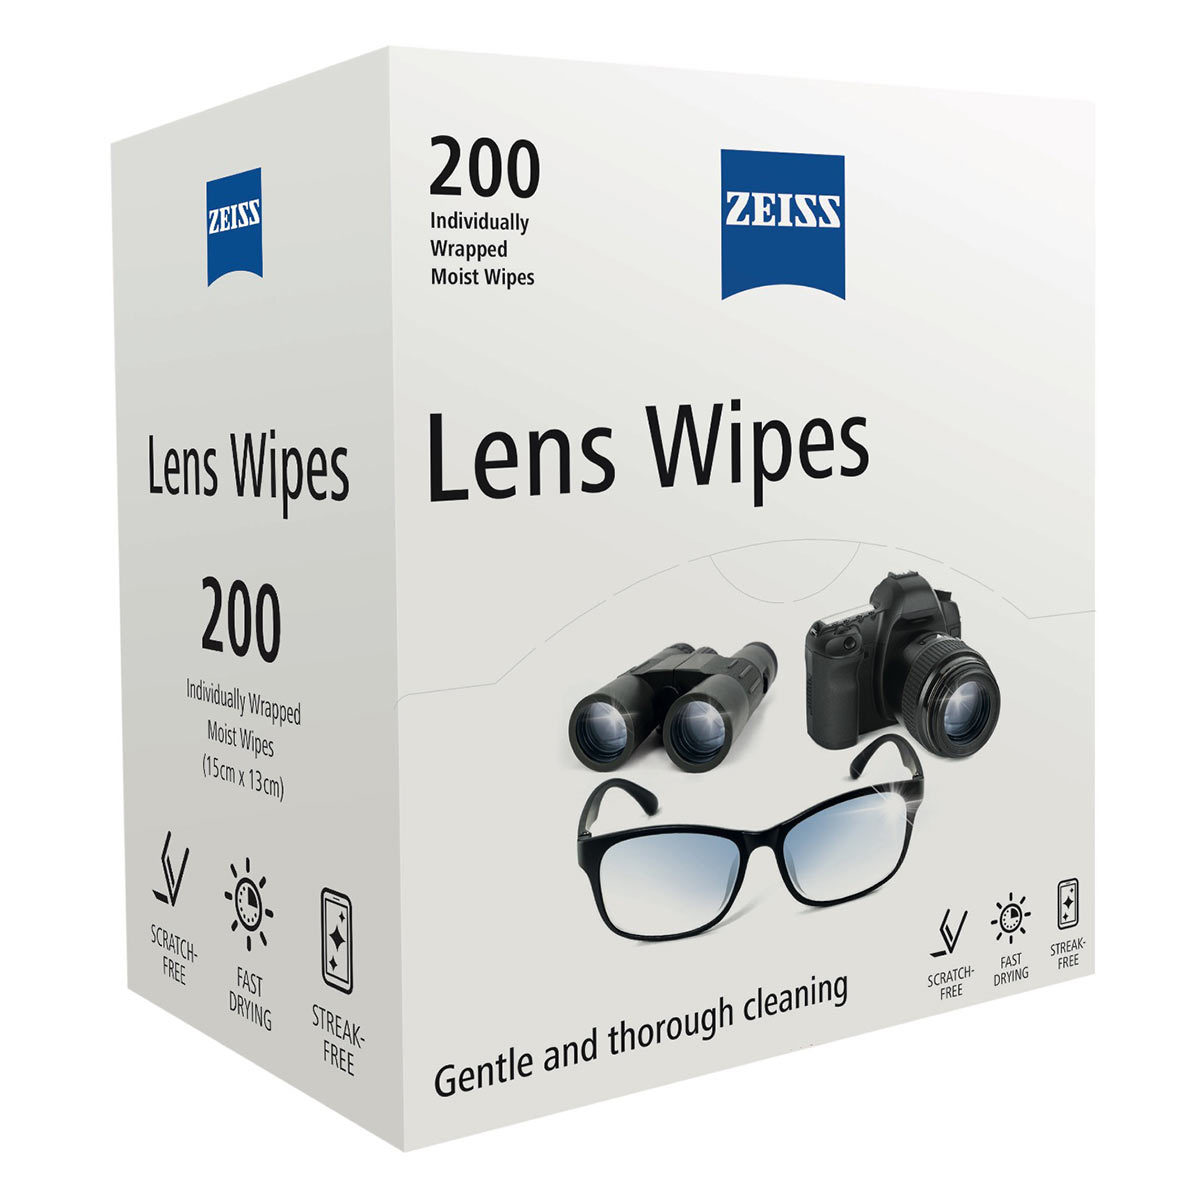 Angled image of the boxed lens wipes